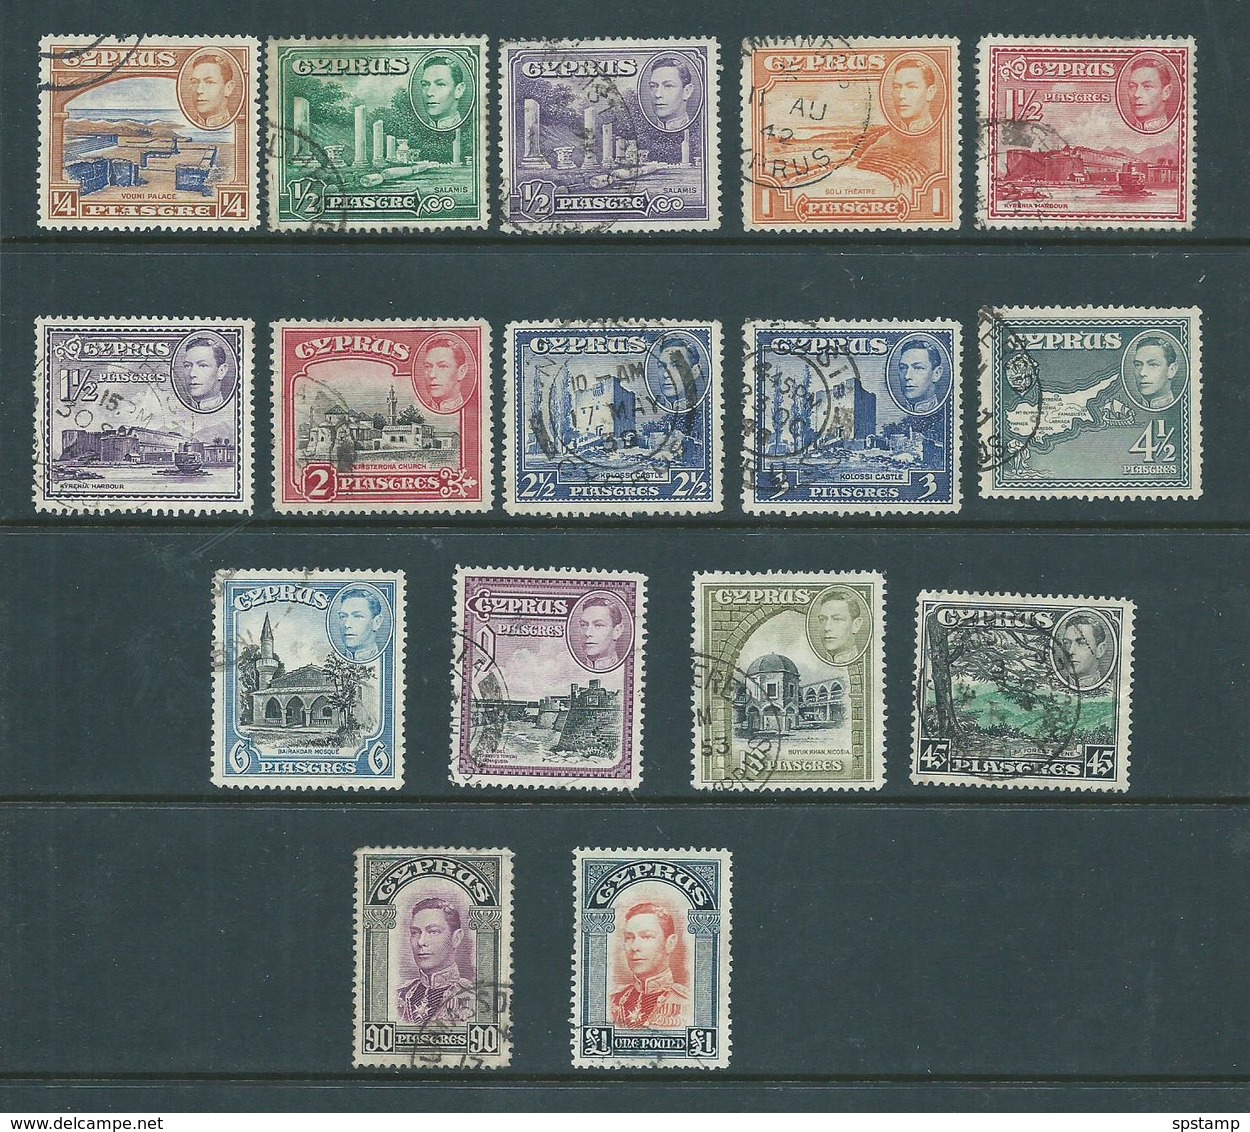 Cyprus 1938 KGVI Definitives First Issue Set Of 16 FU - Used Stamps